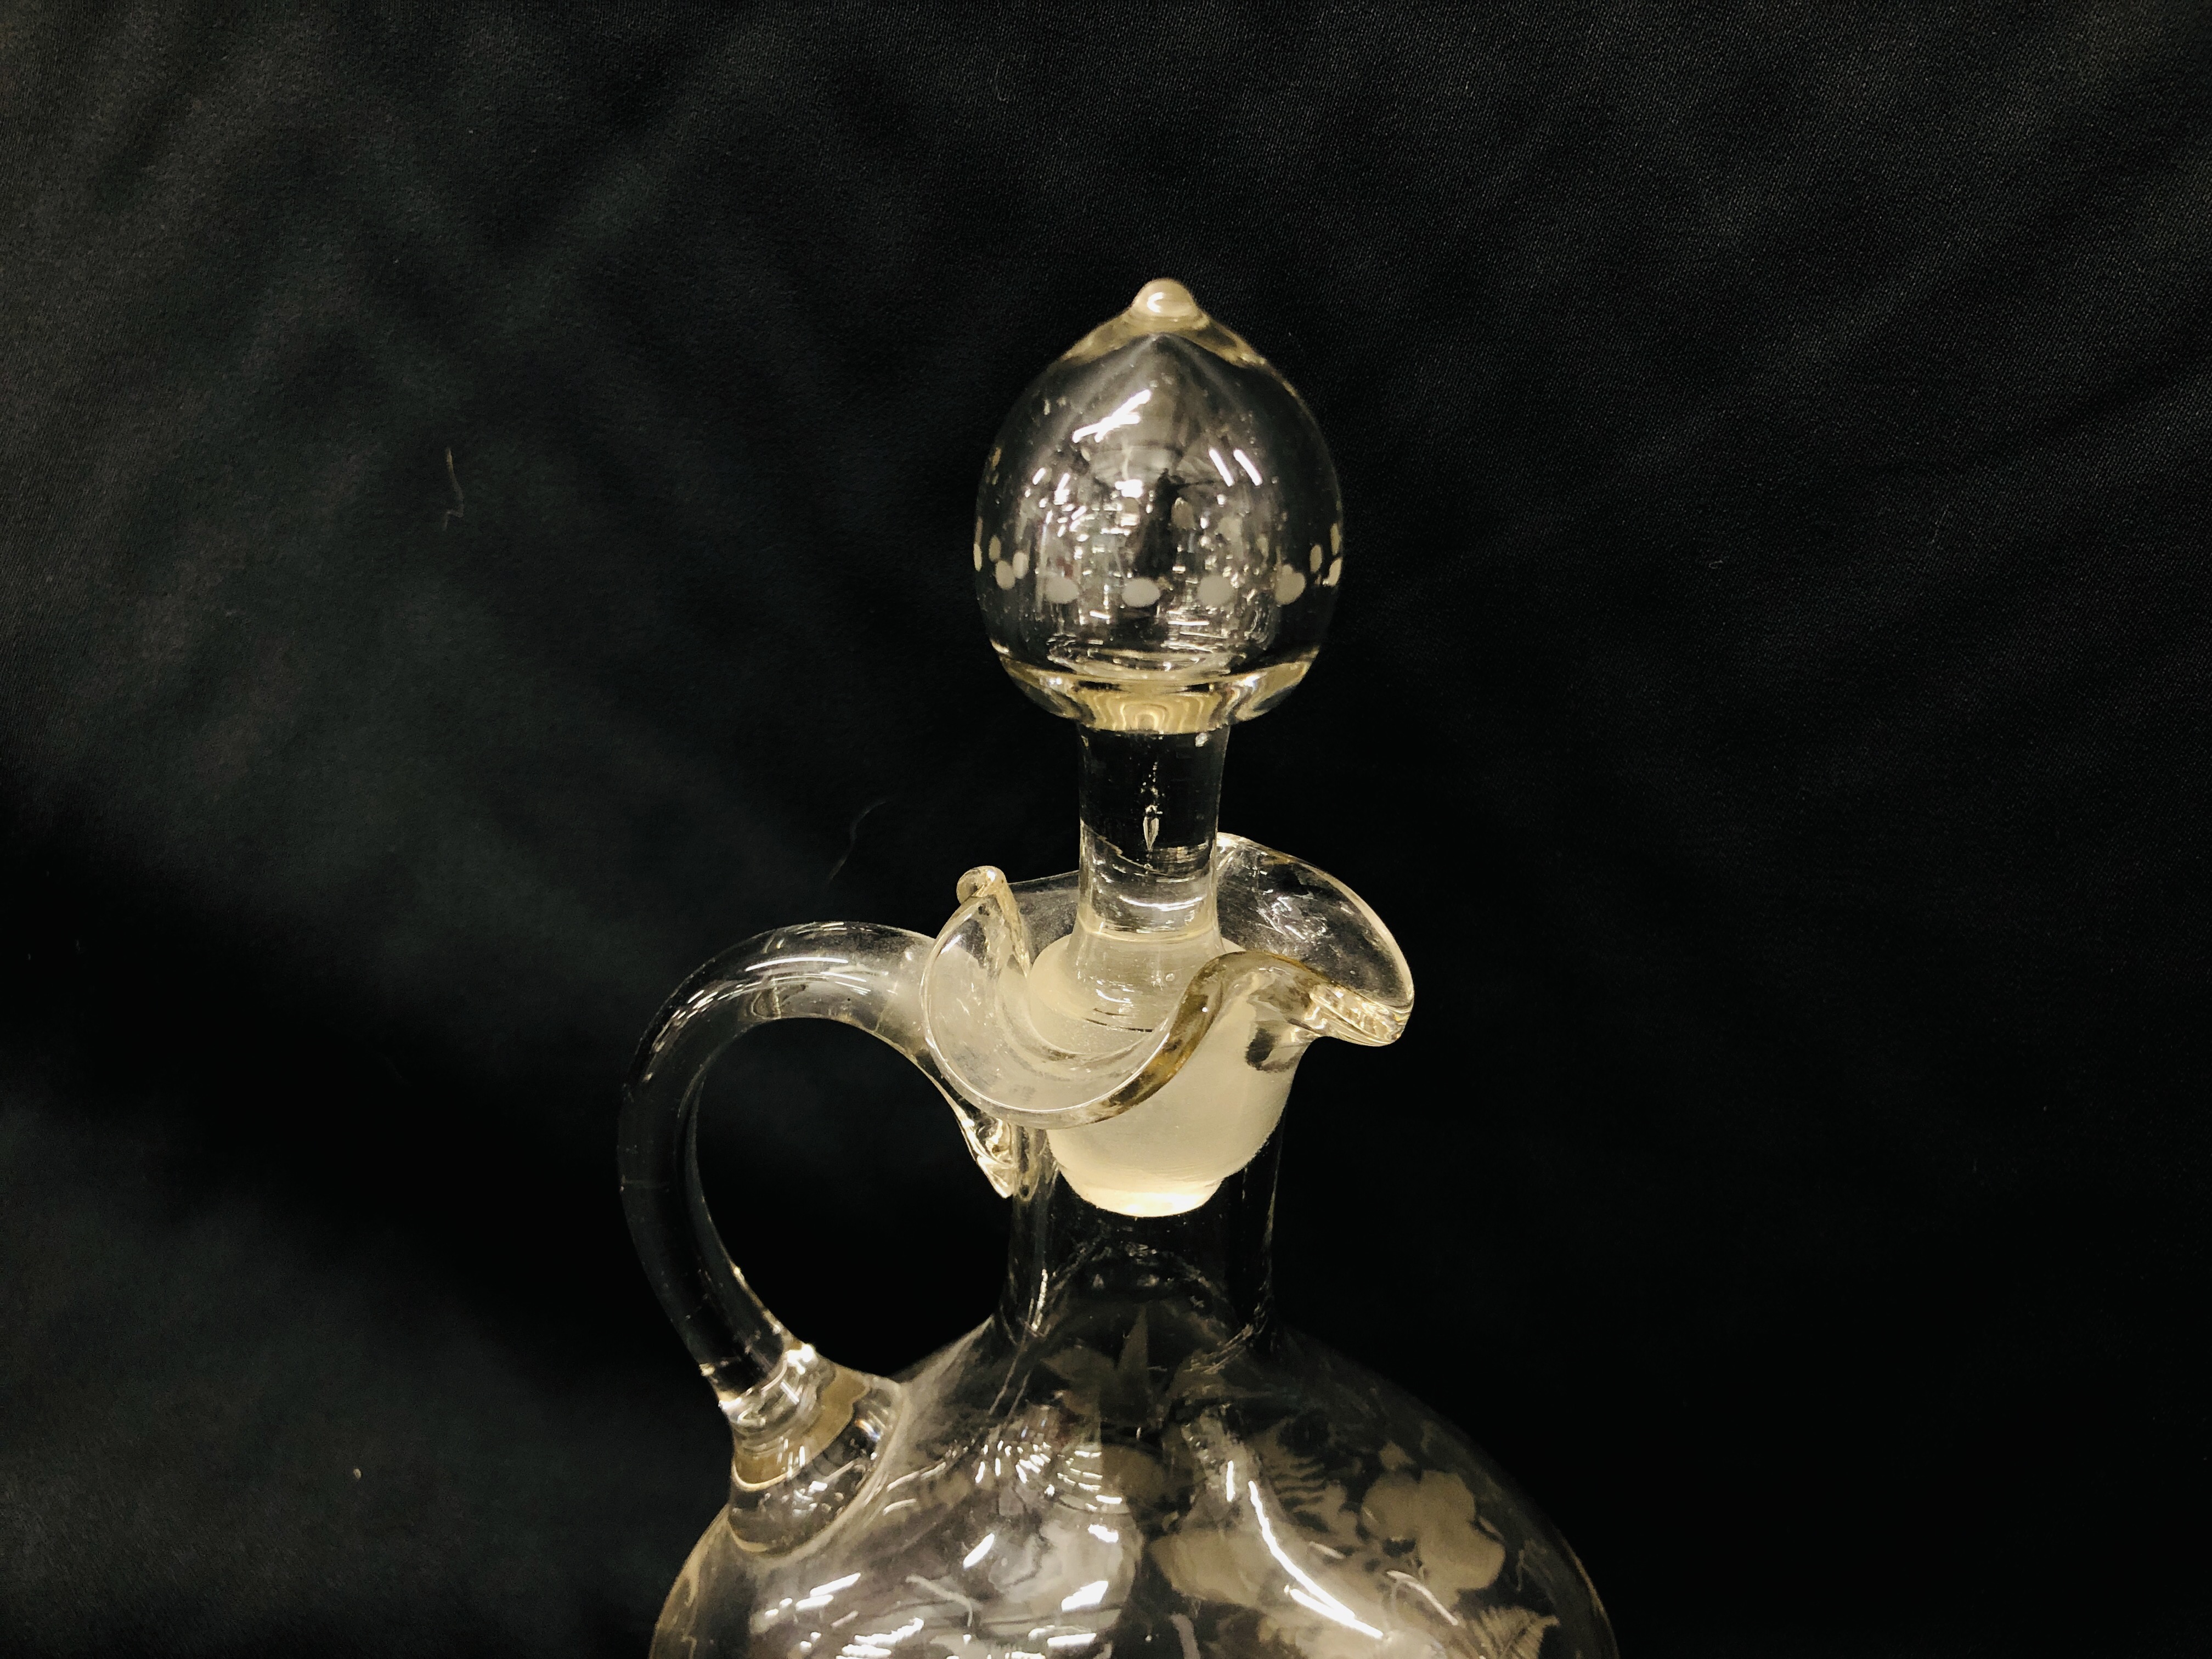 MARY GREGORY CRANBERRY VASE, VINTAGE CLEAR GLASS DECANTER WITH ETCHED FERN AND BIRD DESIGN. - Image 8 of 10